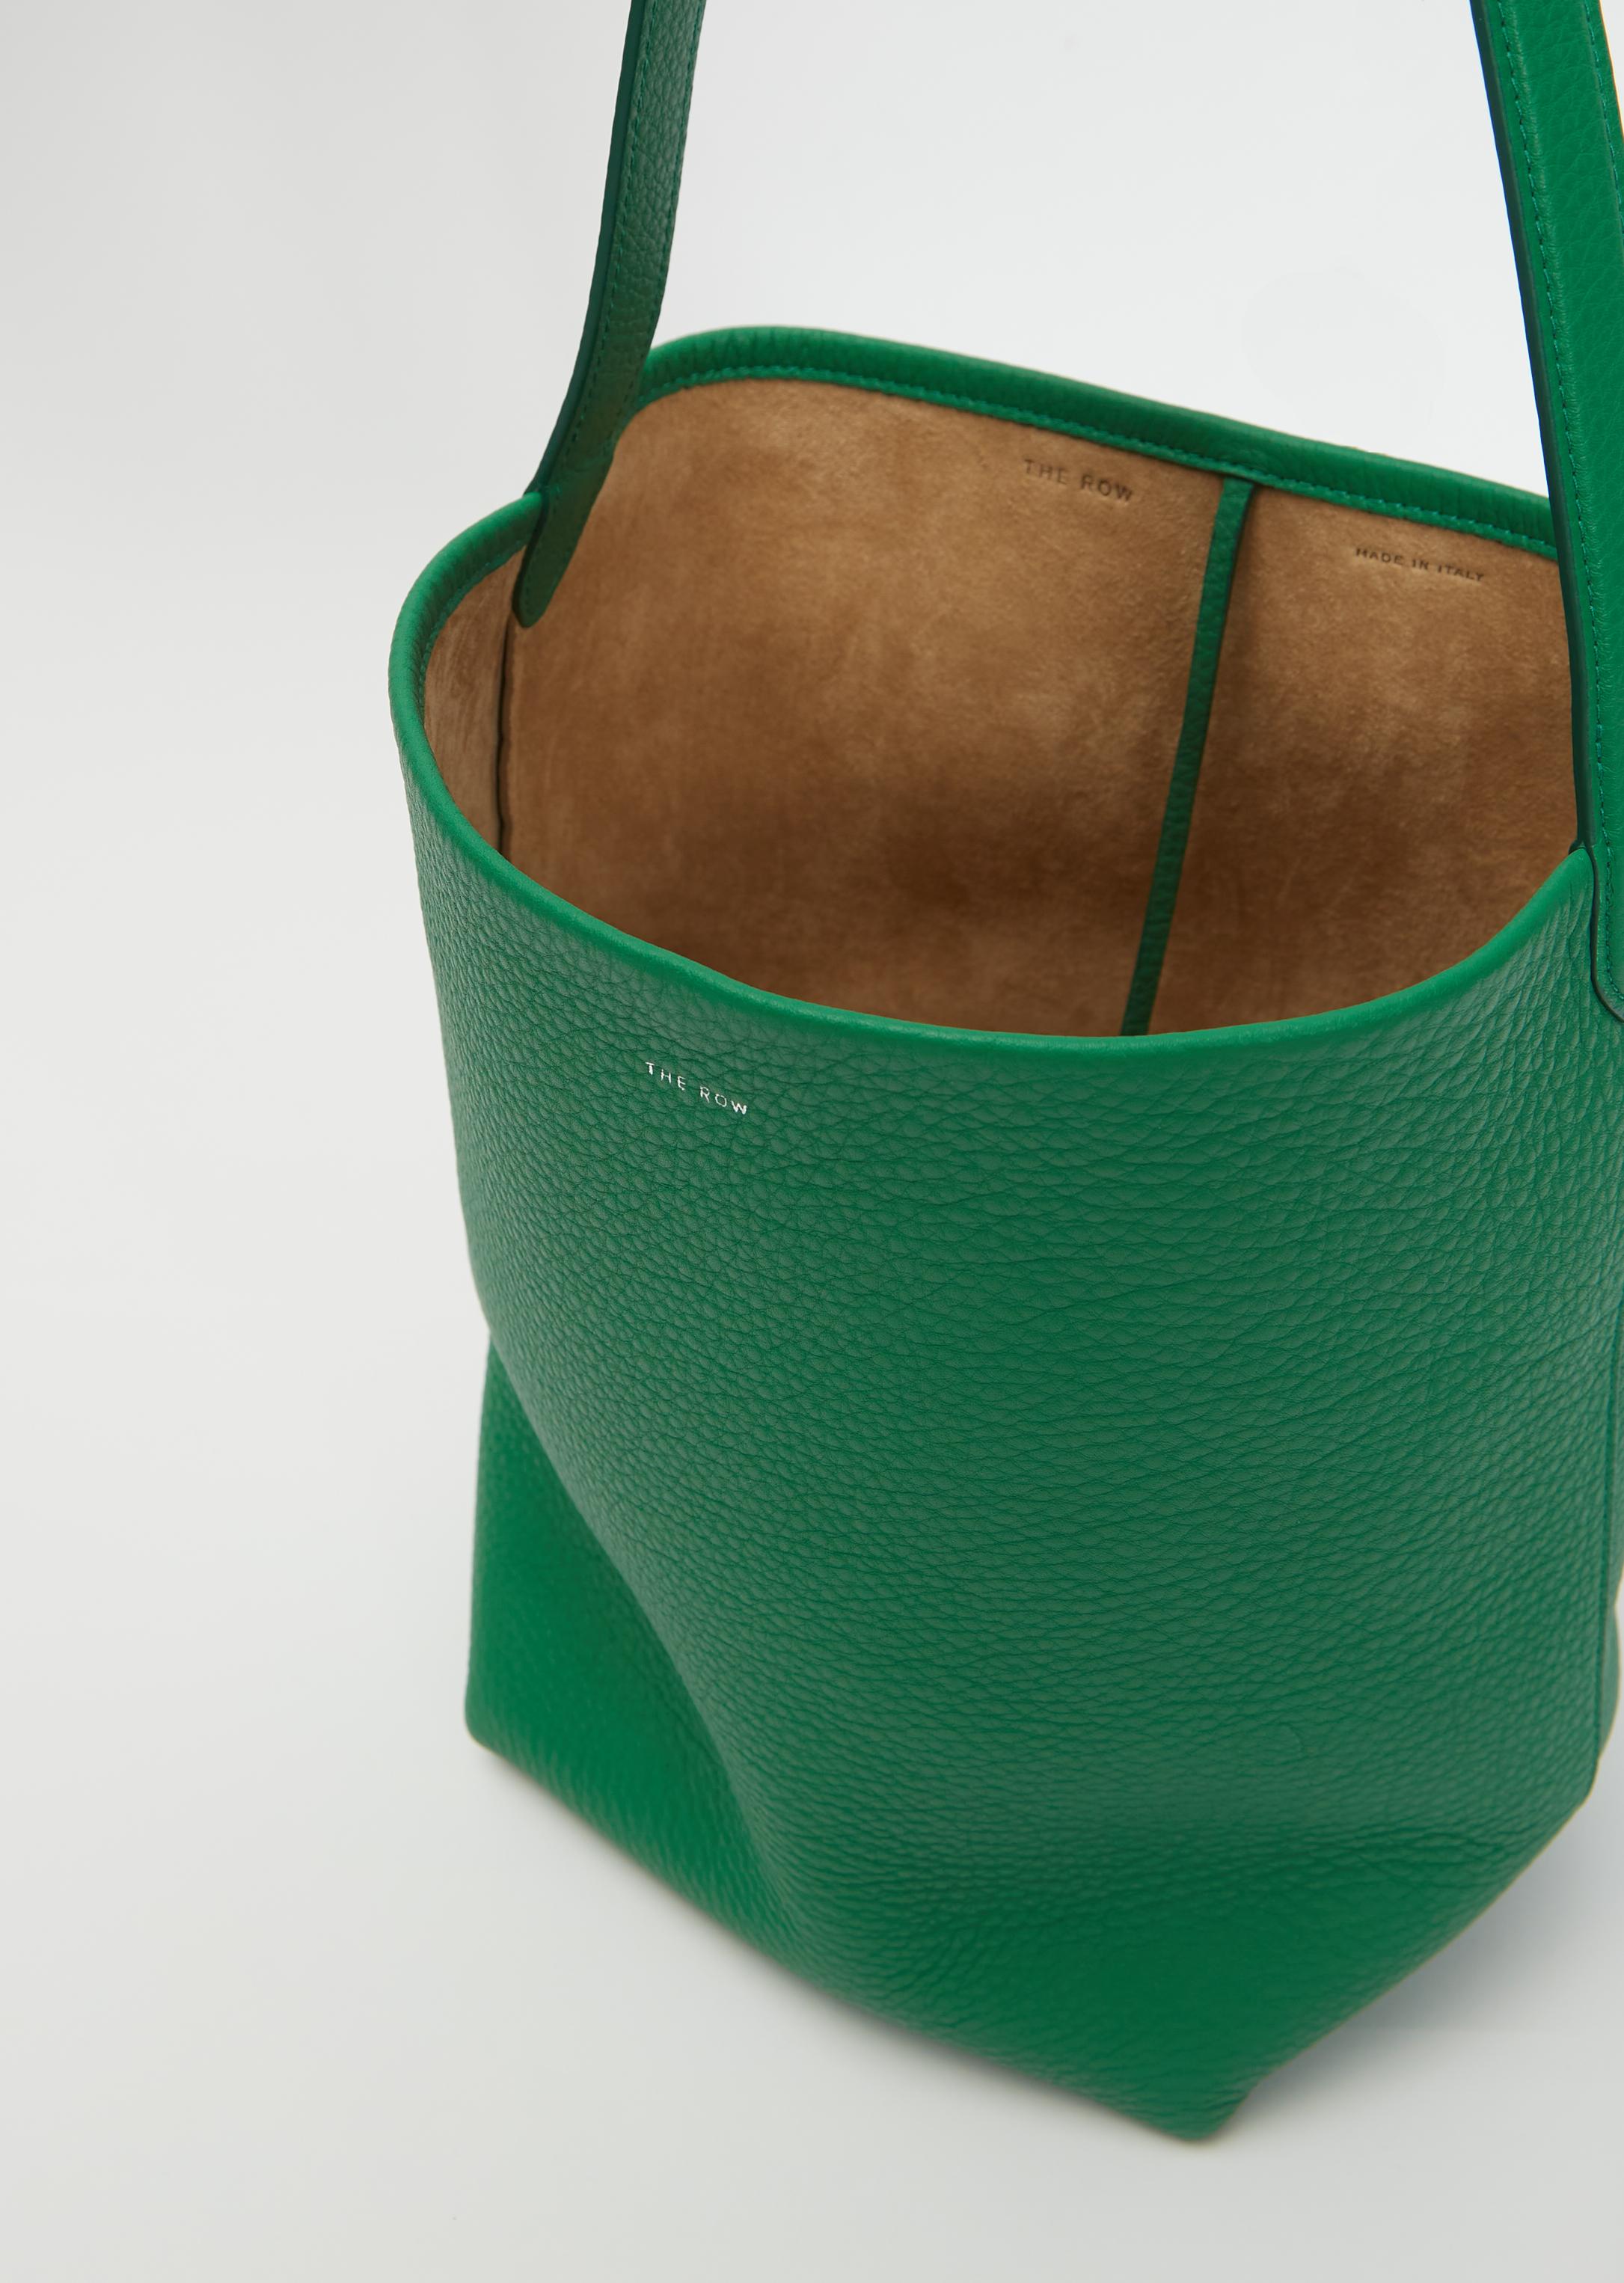 The Row Large N/s Park Tote in Green